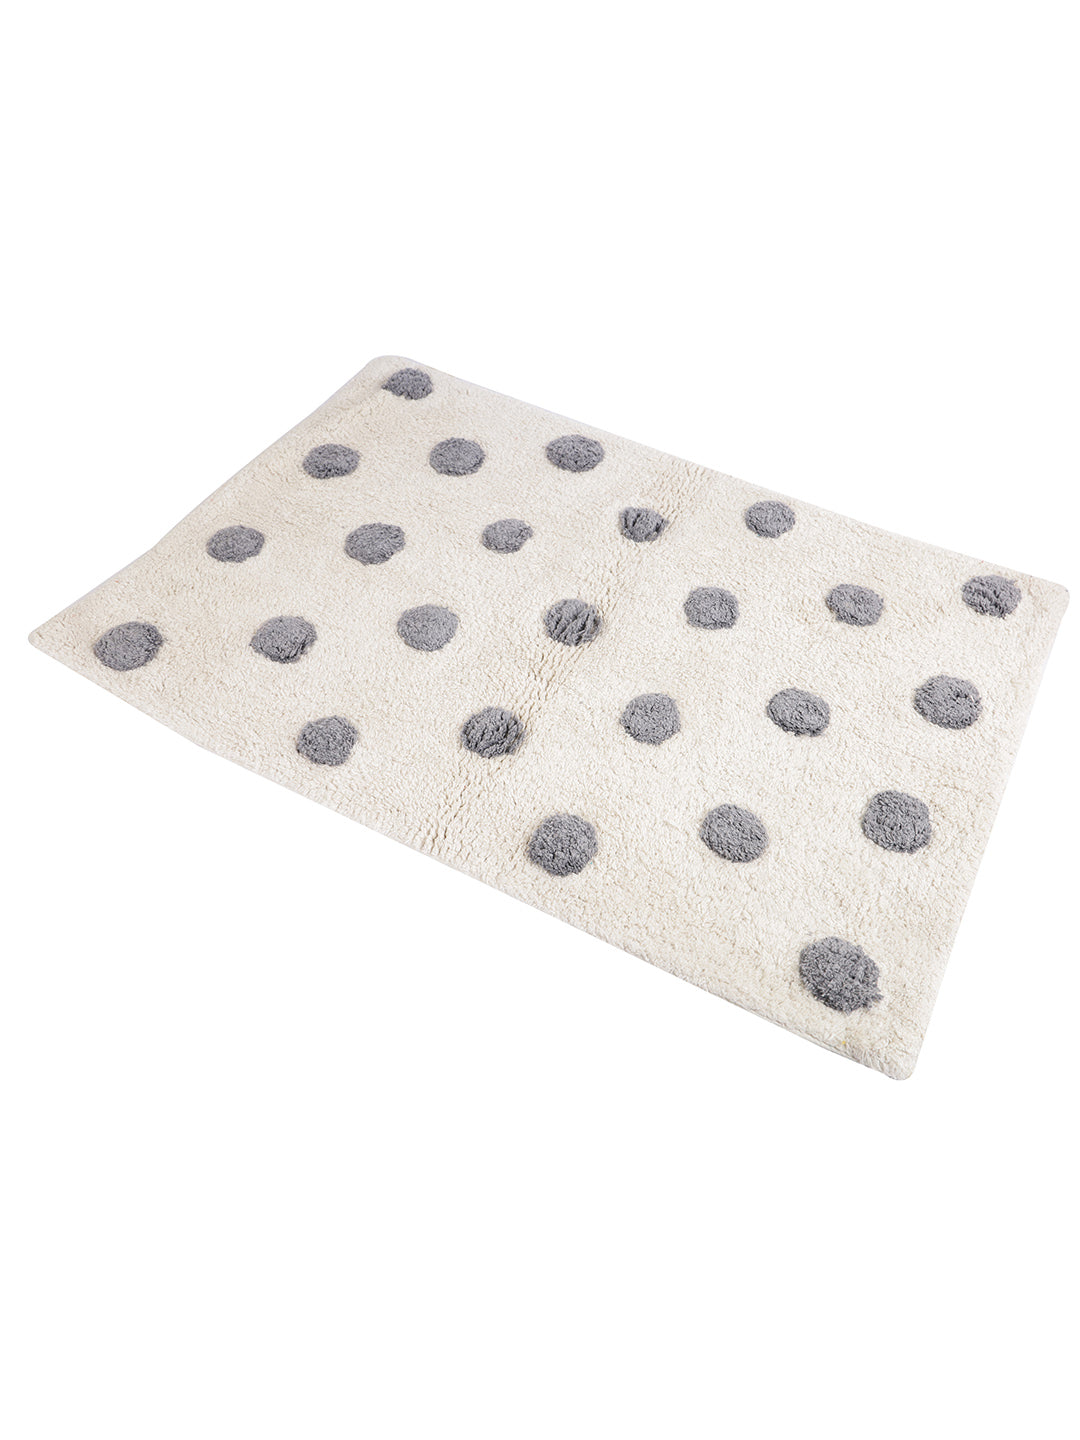 Ivory and Grey Hand Tufted Cotton Bath Rug